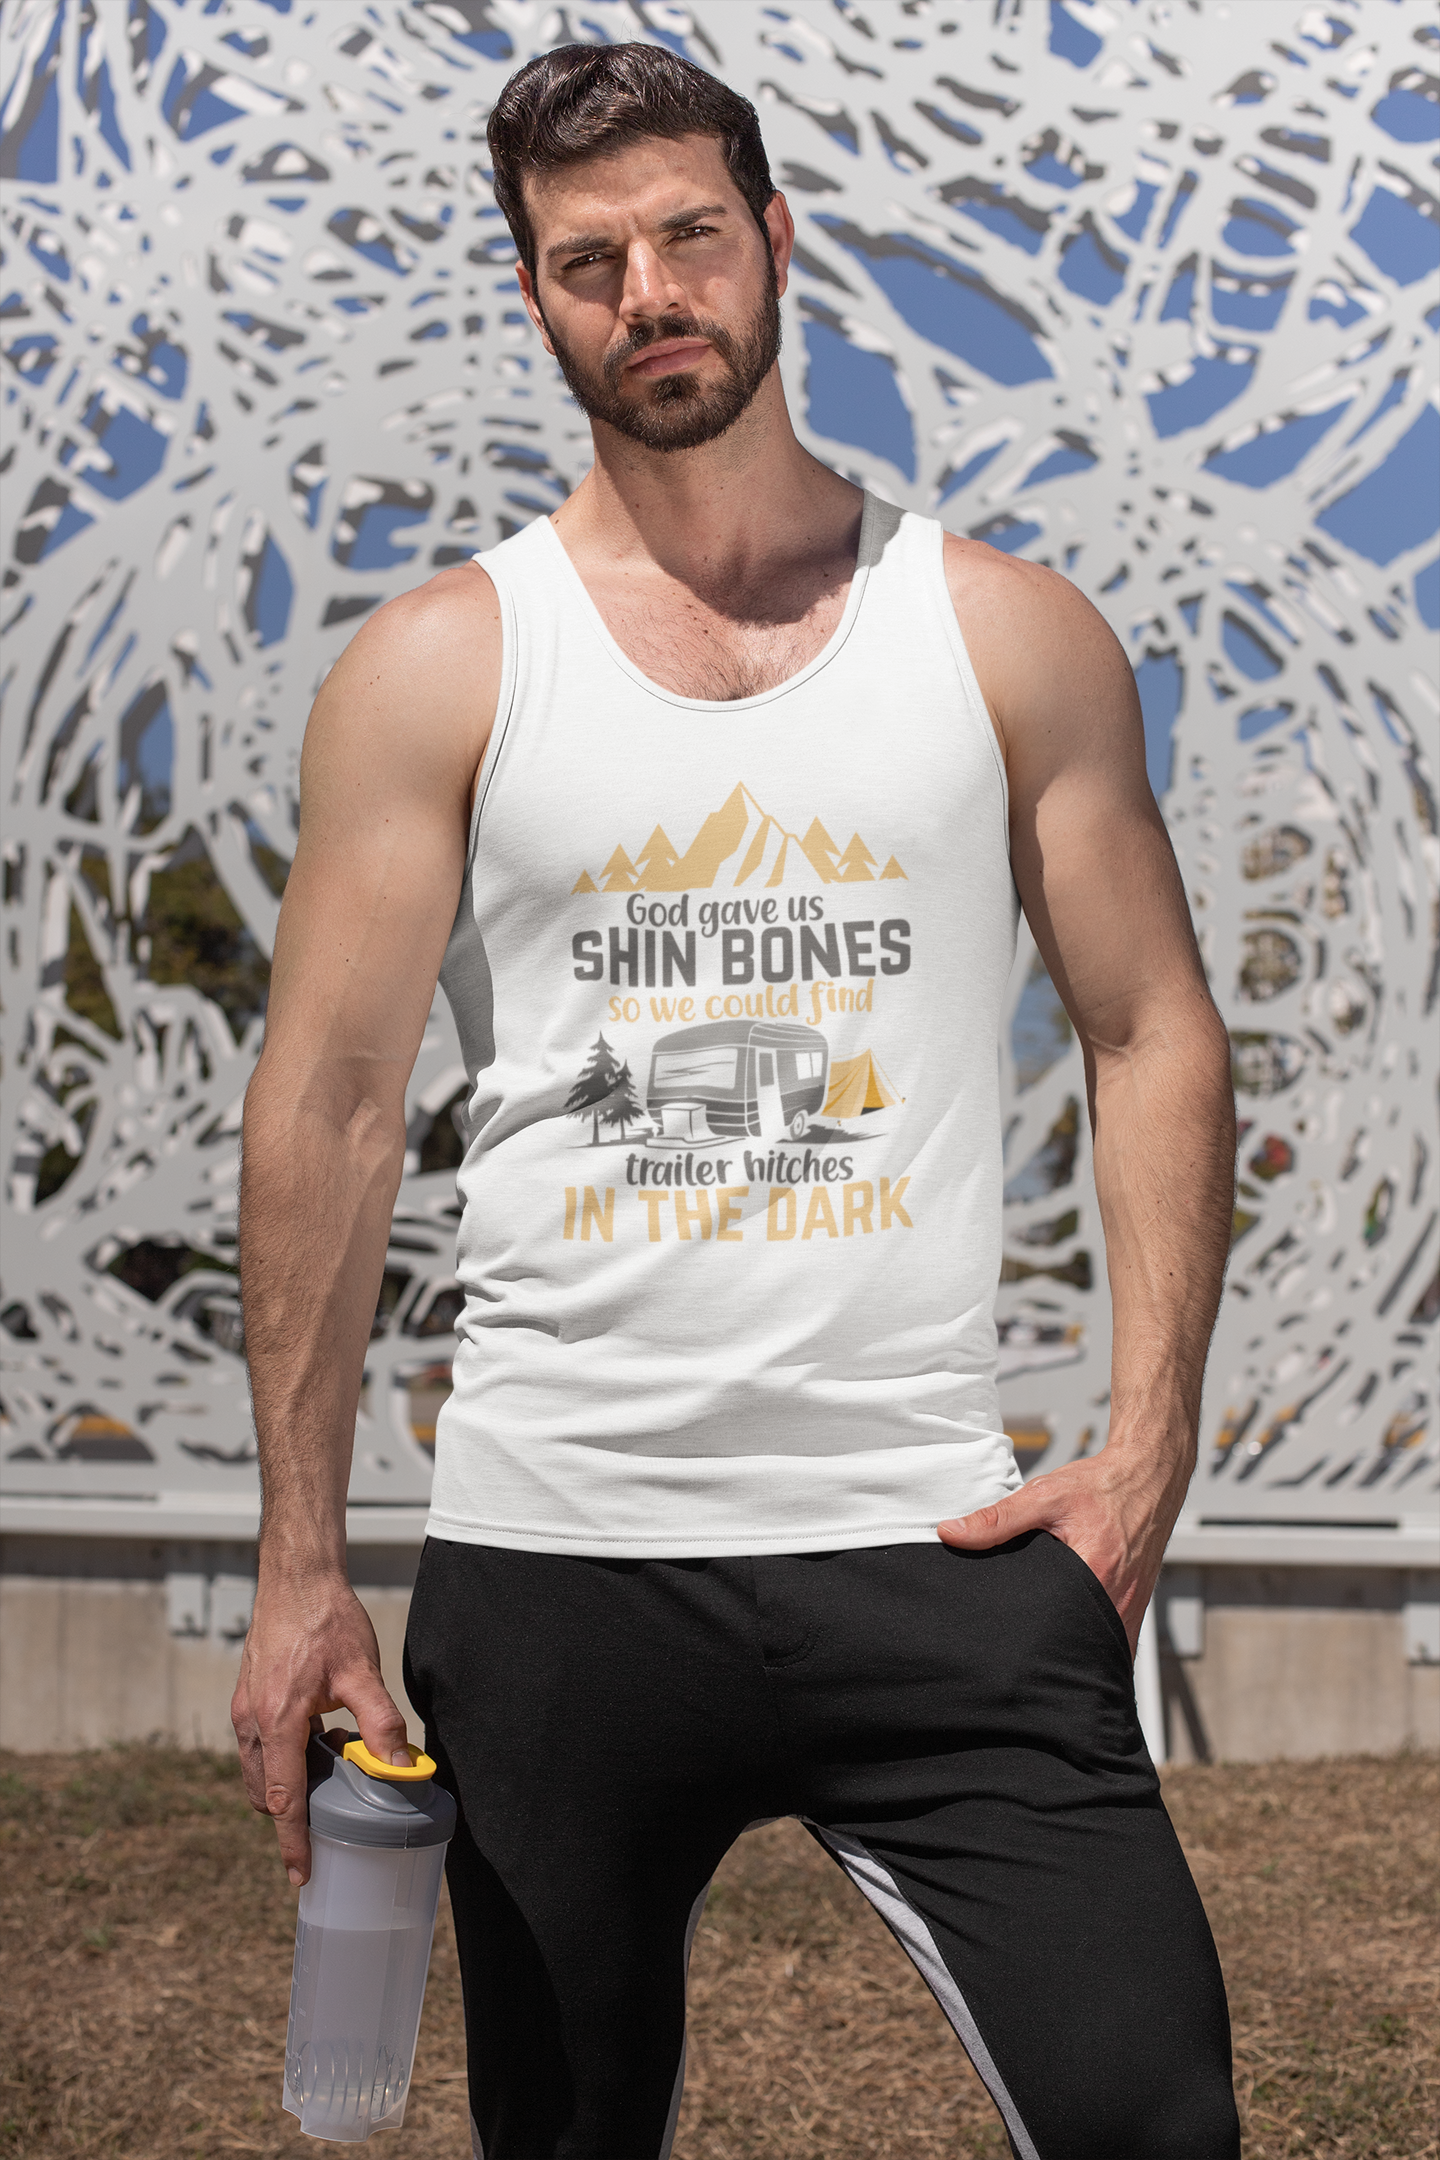 Shin bones find trailer hitches; Soft 100% cotton tank top. Removable tag for comfort